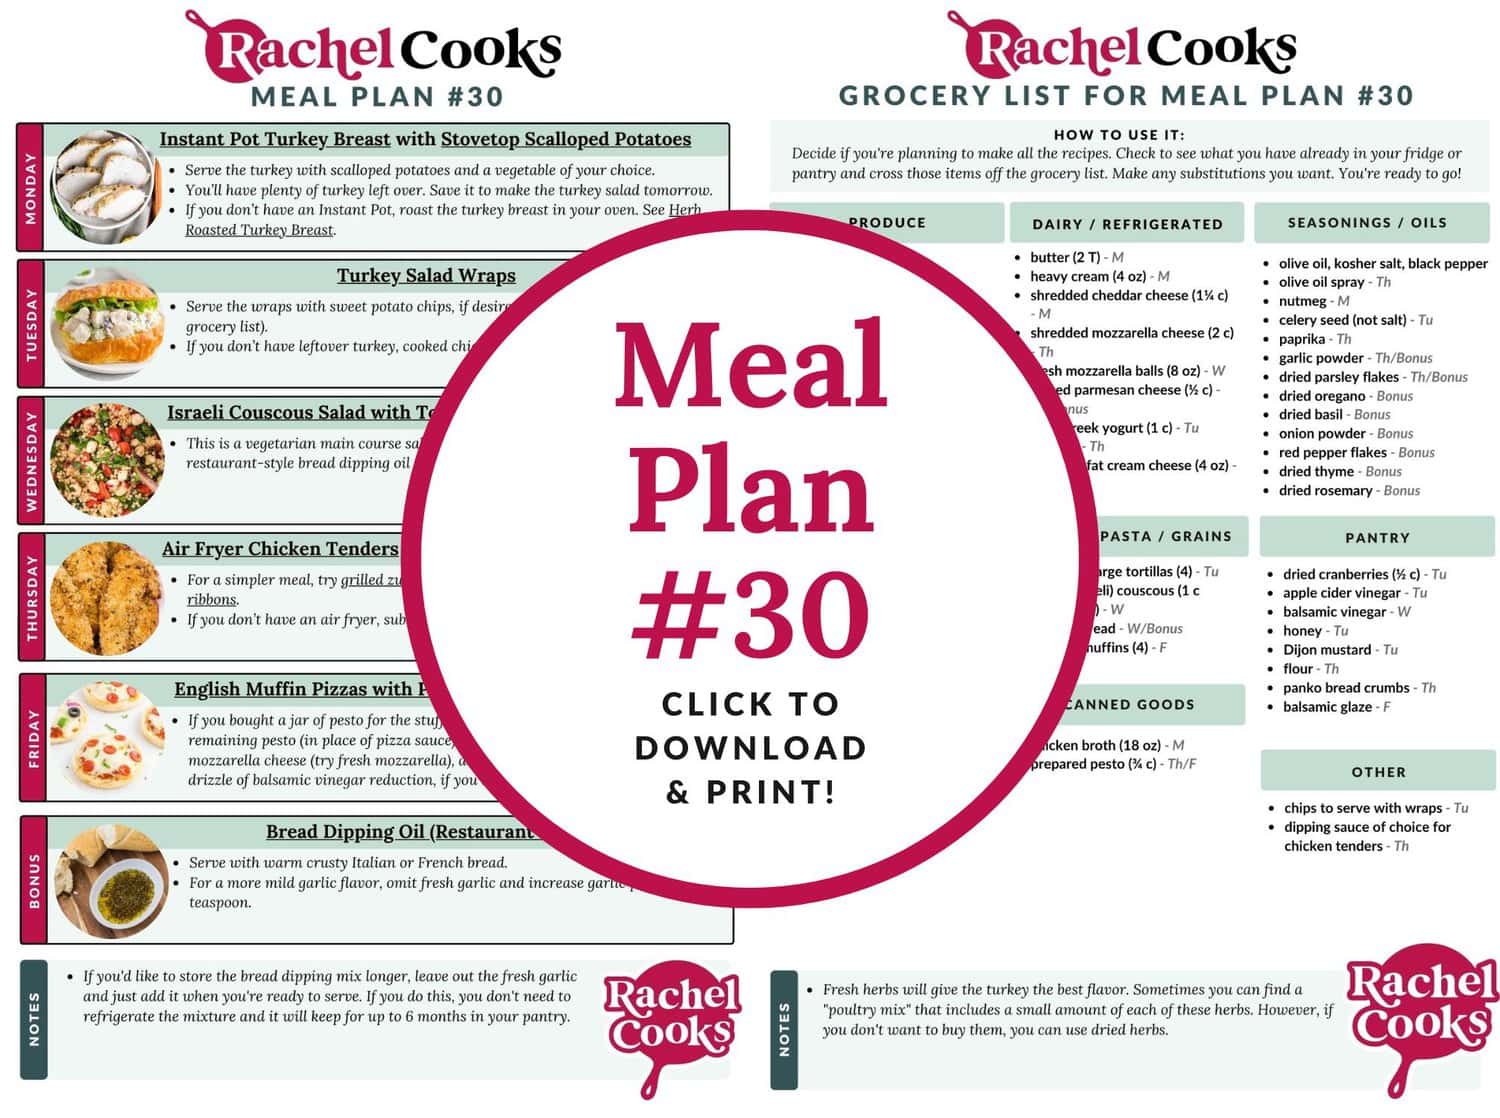 Meal plan 30 preview image.